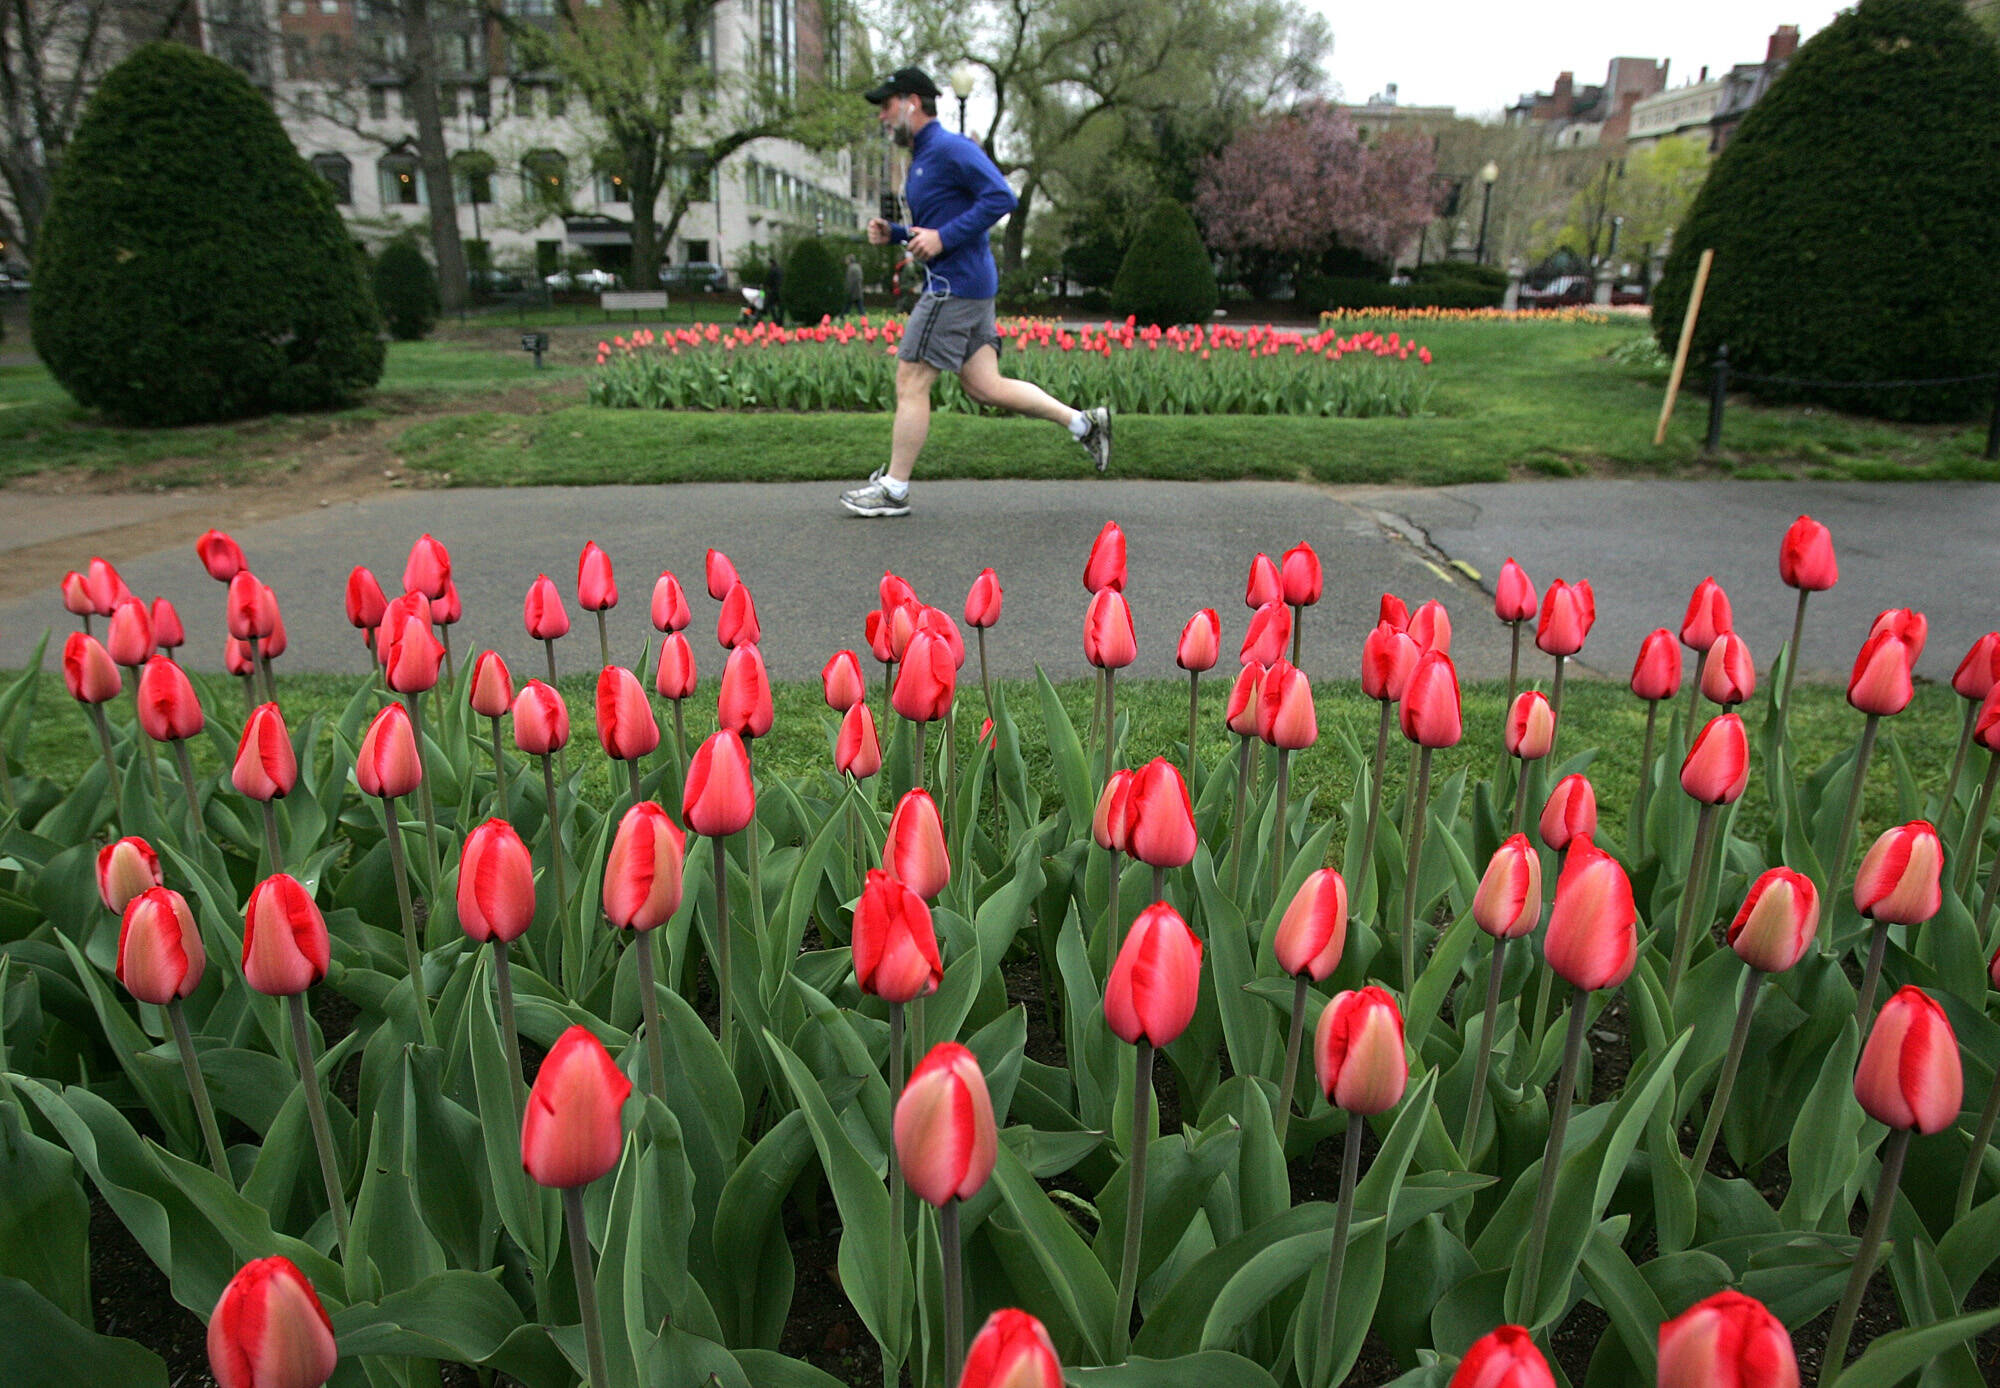 A runner jogs by a bed of tulips in the Boston Public Garden. (Photo by Lisa Hornak/MediaNews Group/Boston Herald via Getty Images)